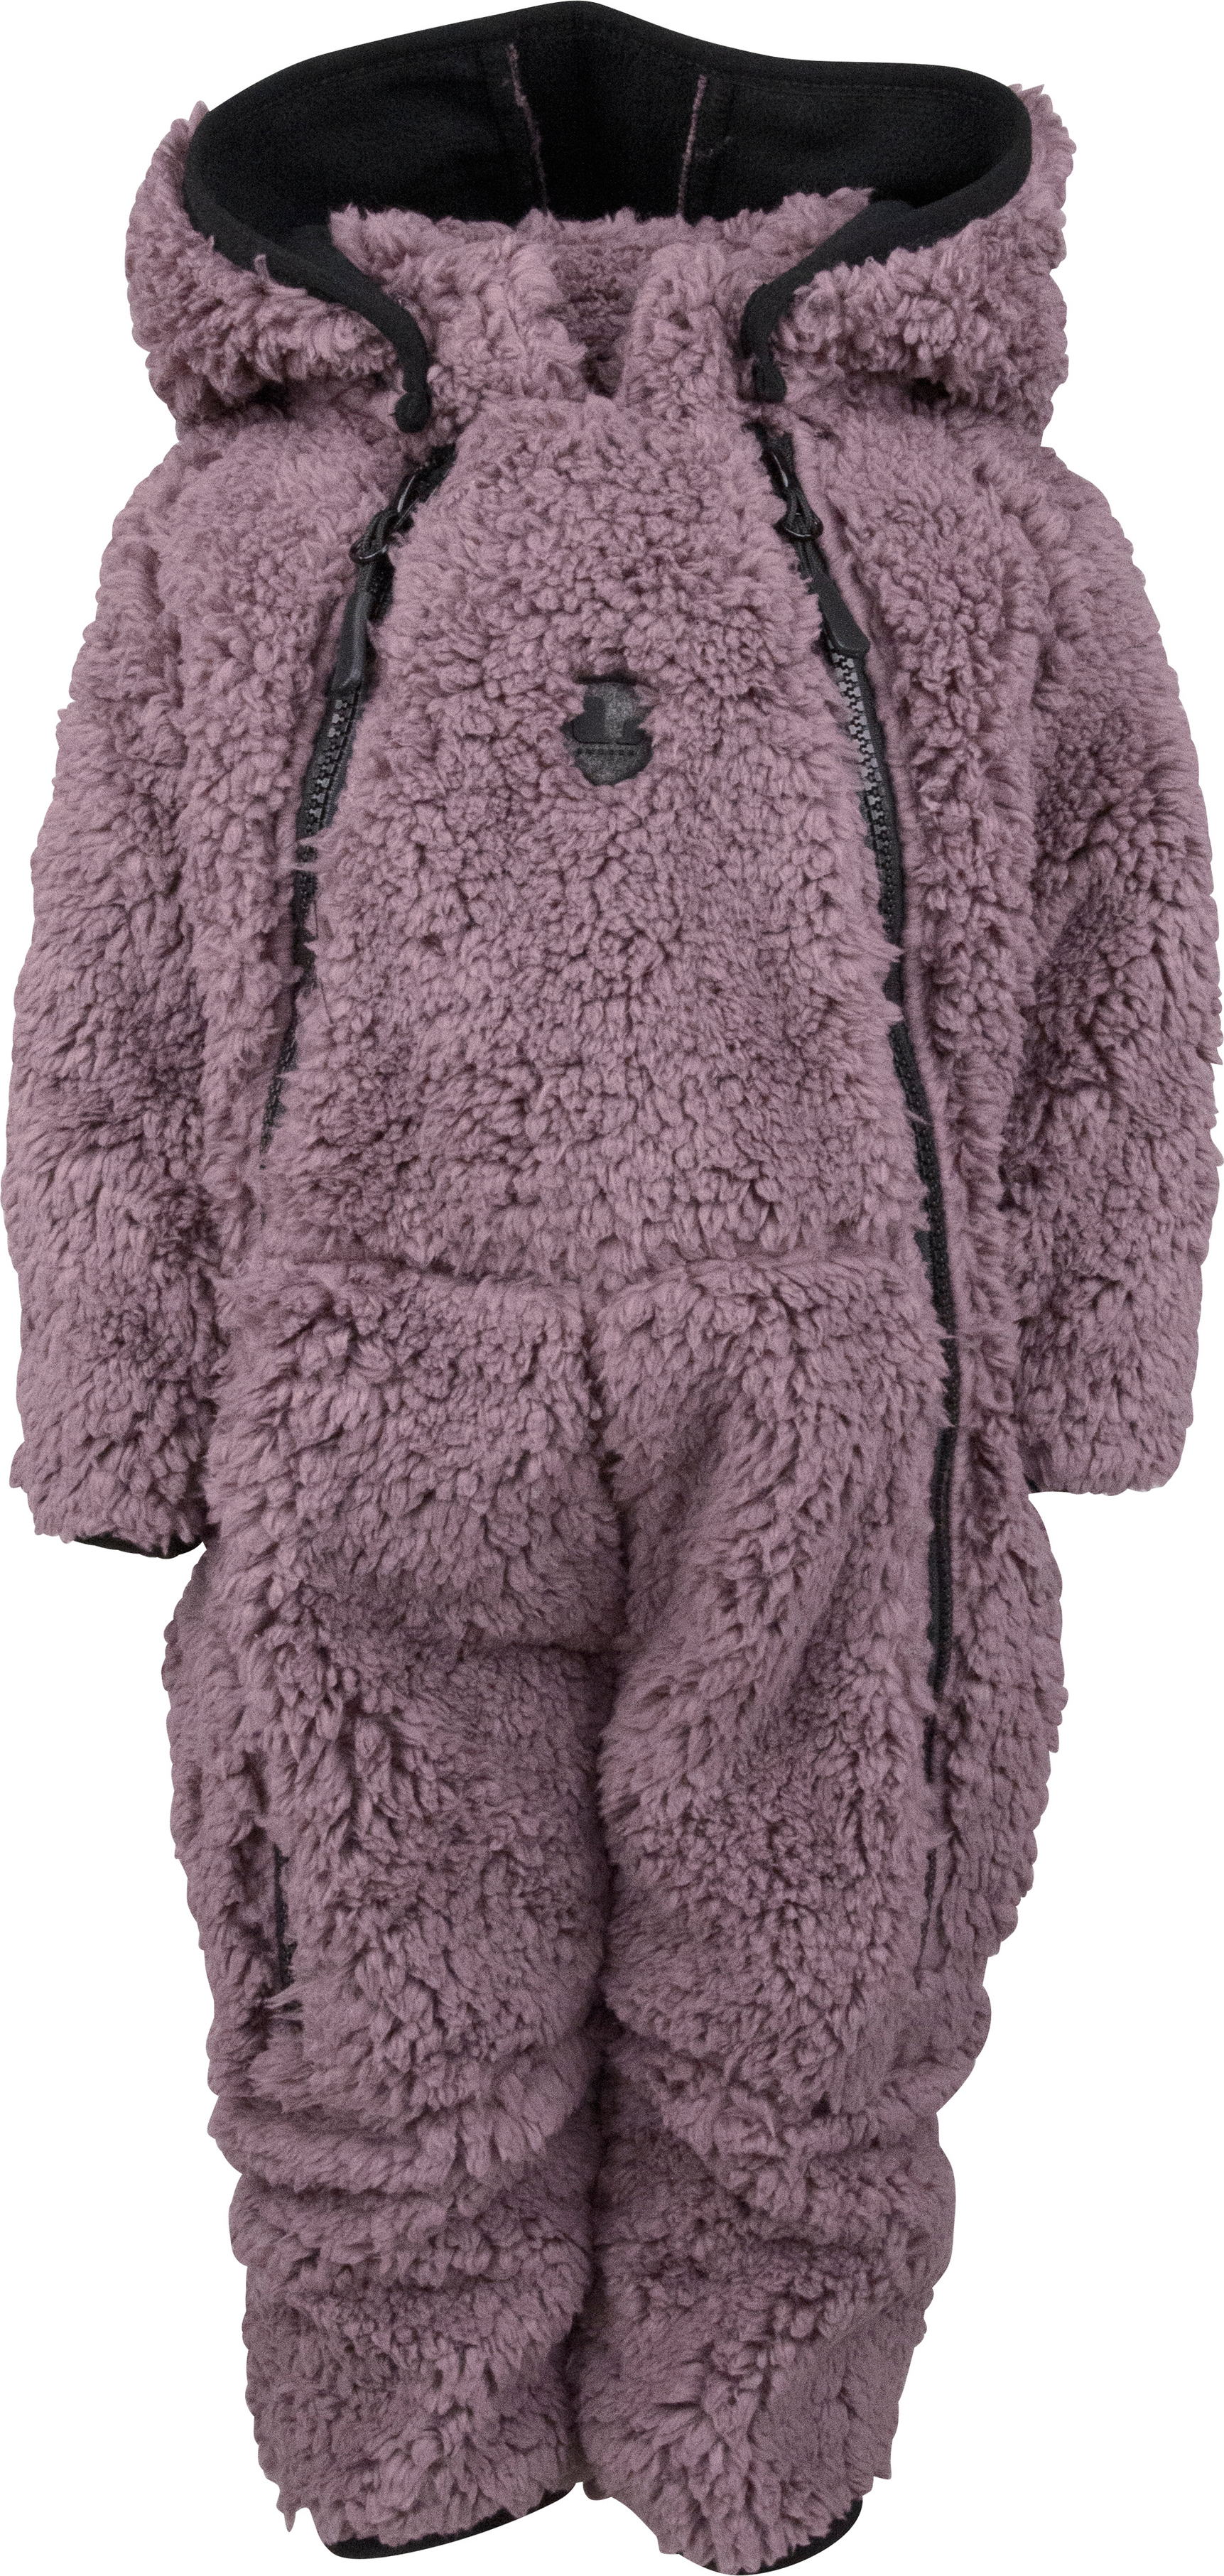 Kids’ Muddus Pile Baby Overall Dusty Mauve